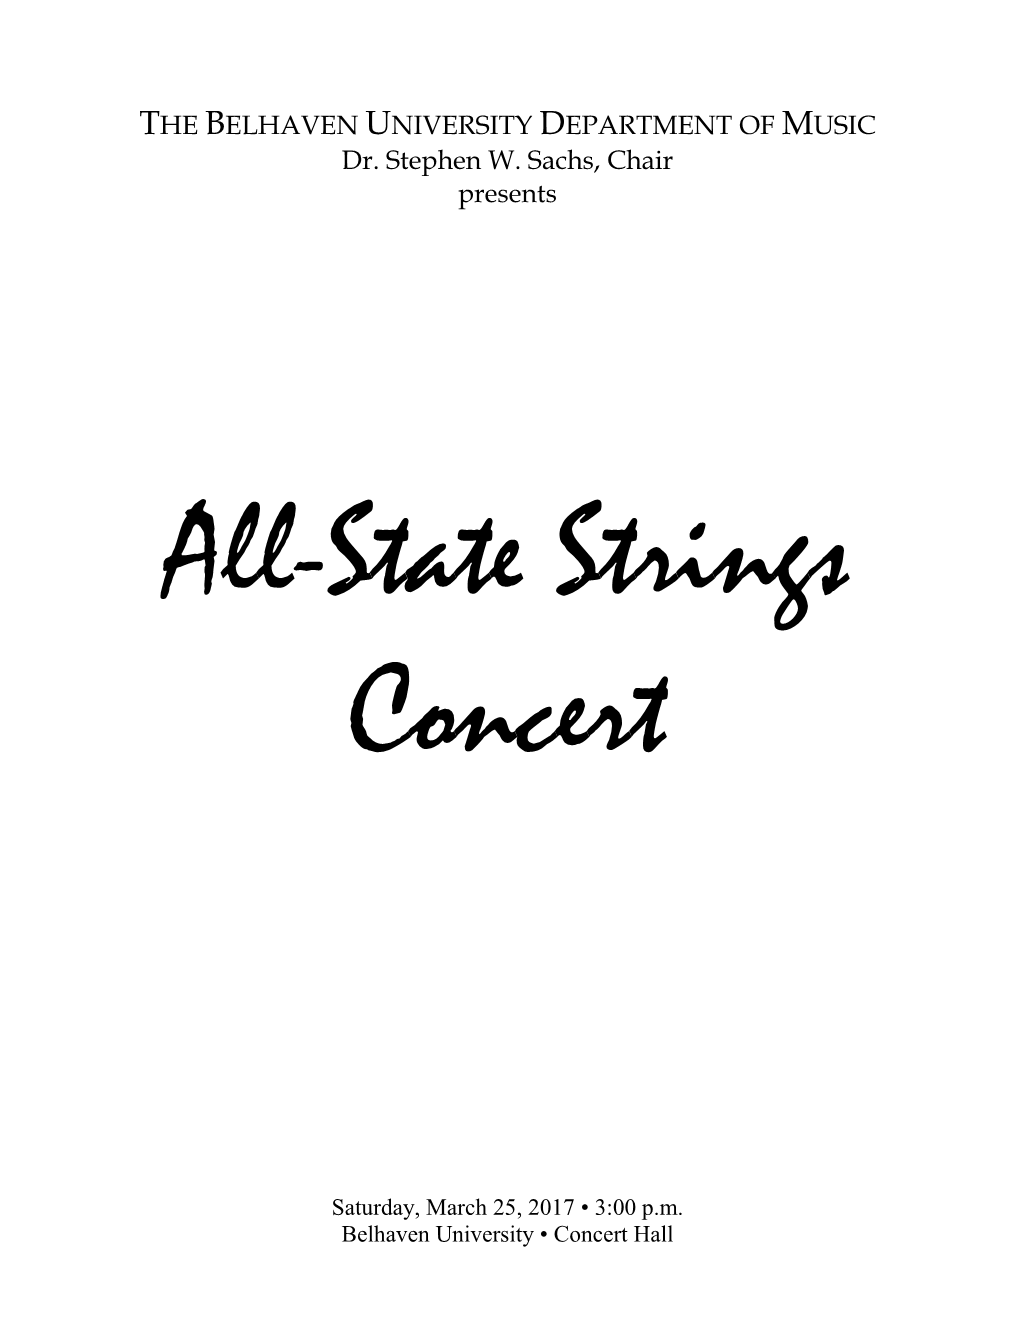 All-State Strings Concert